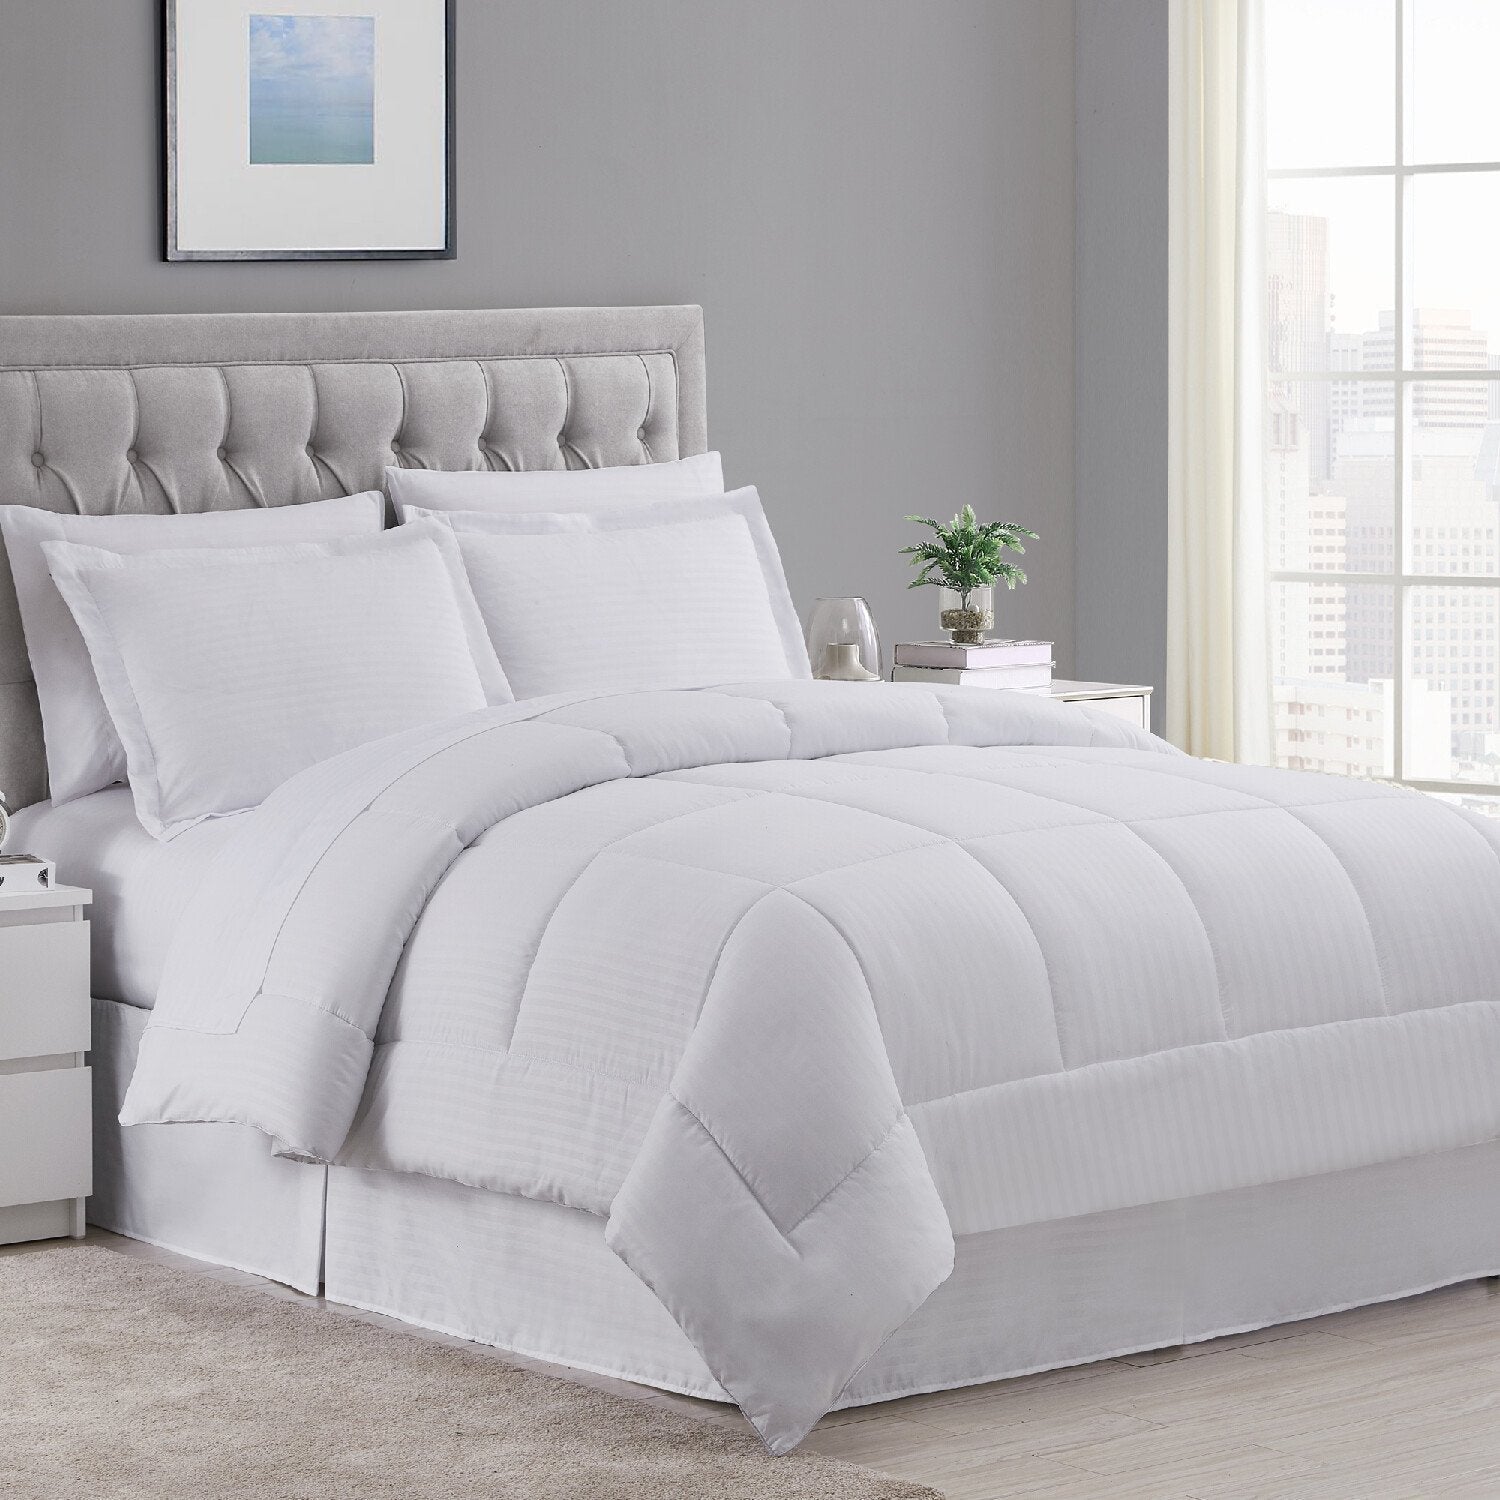 Dobby Stripe 8-Piece Bed In A Bag Comforter Set White - Bed